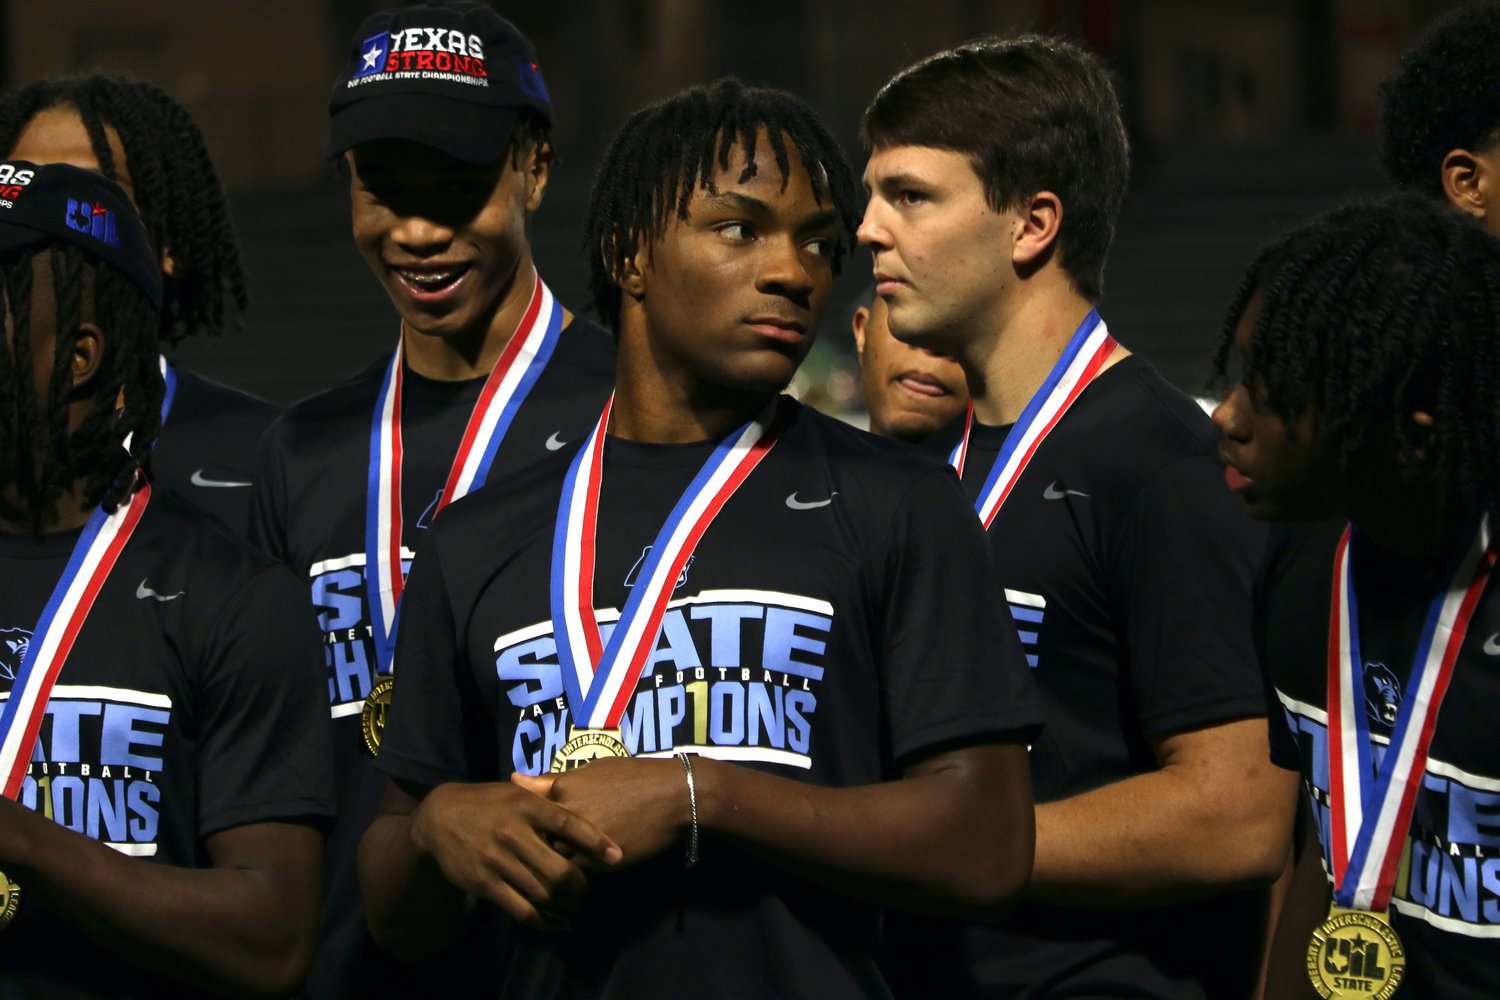 Kentrell Webb talks to his teammates during Wednesday's Paetow State Championship celebration at Legacy Stadium